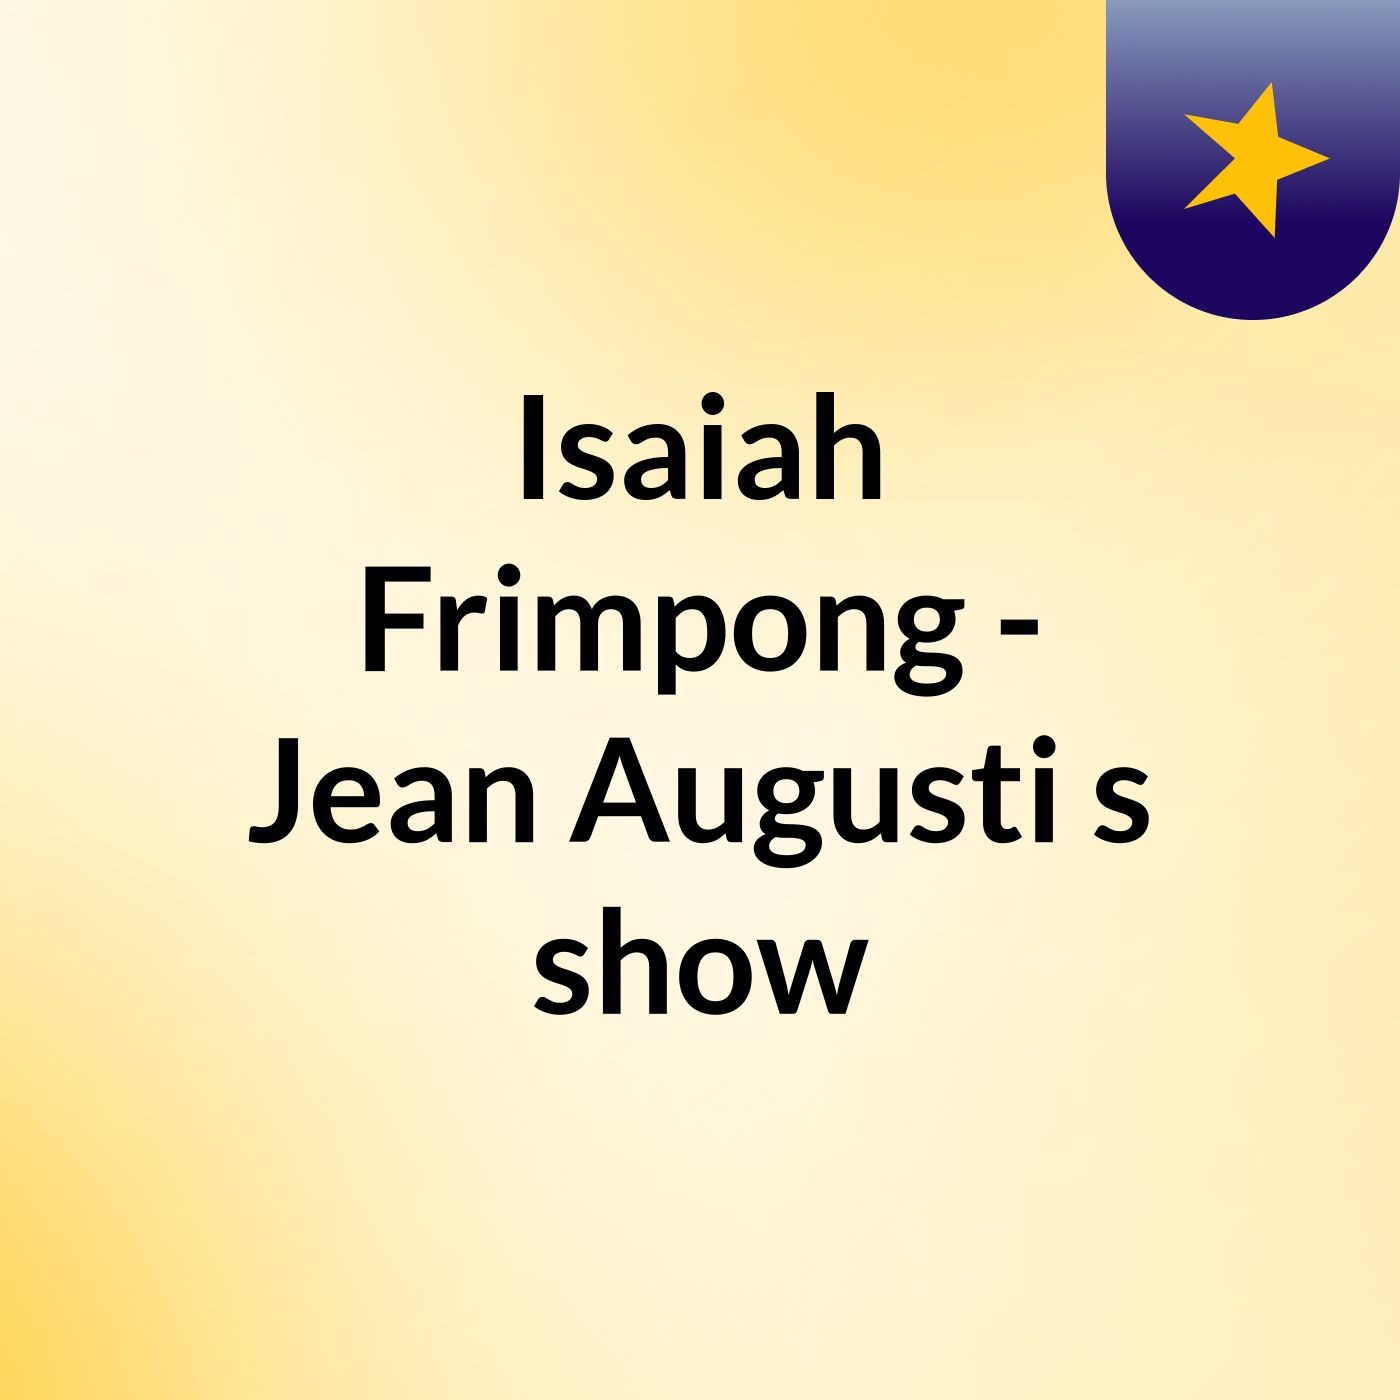 Episode 2 - Isaiah Frimpong - Jean Augusti's show